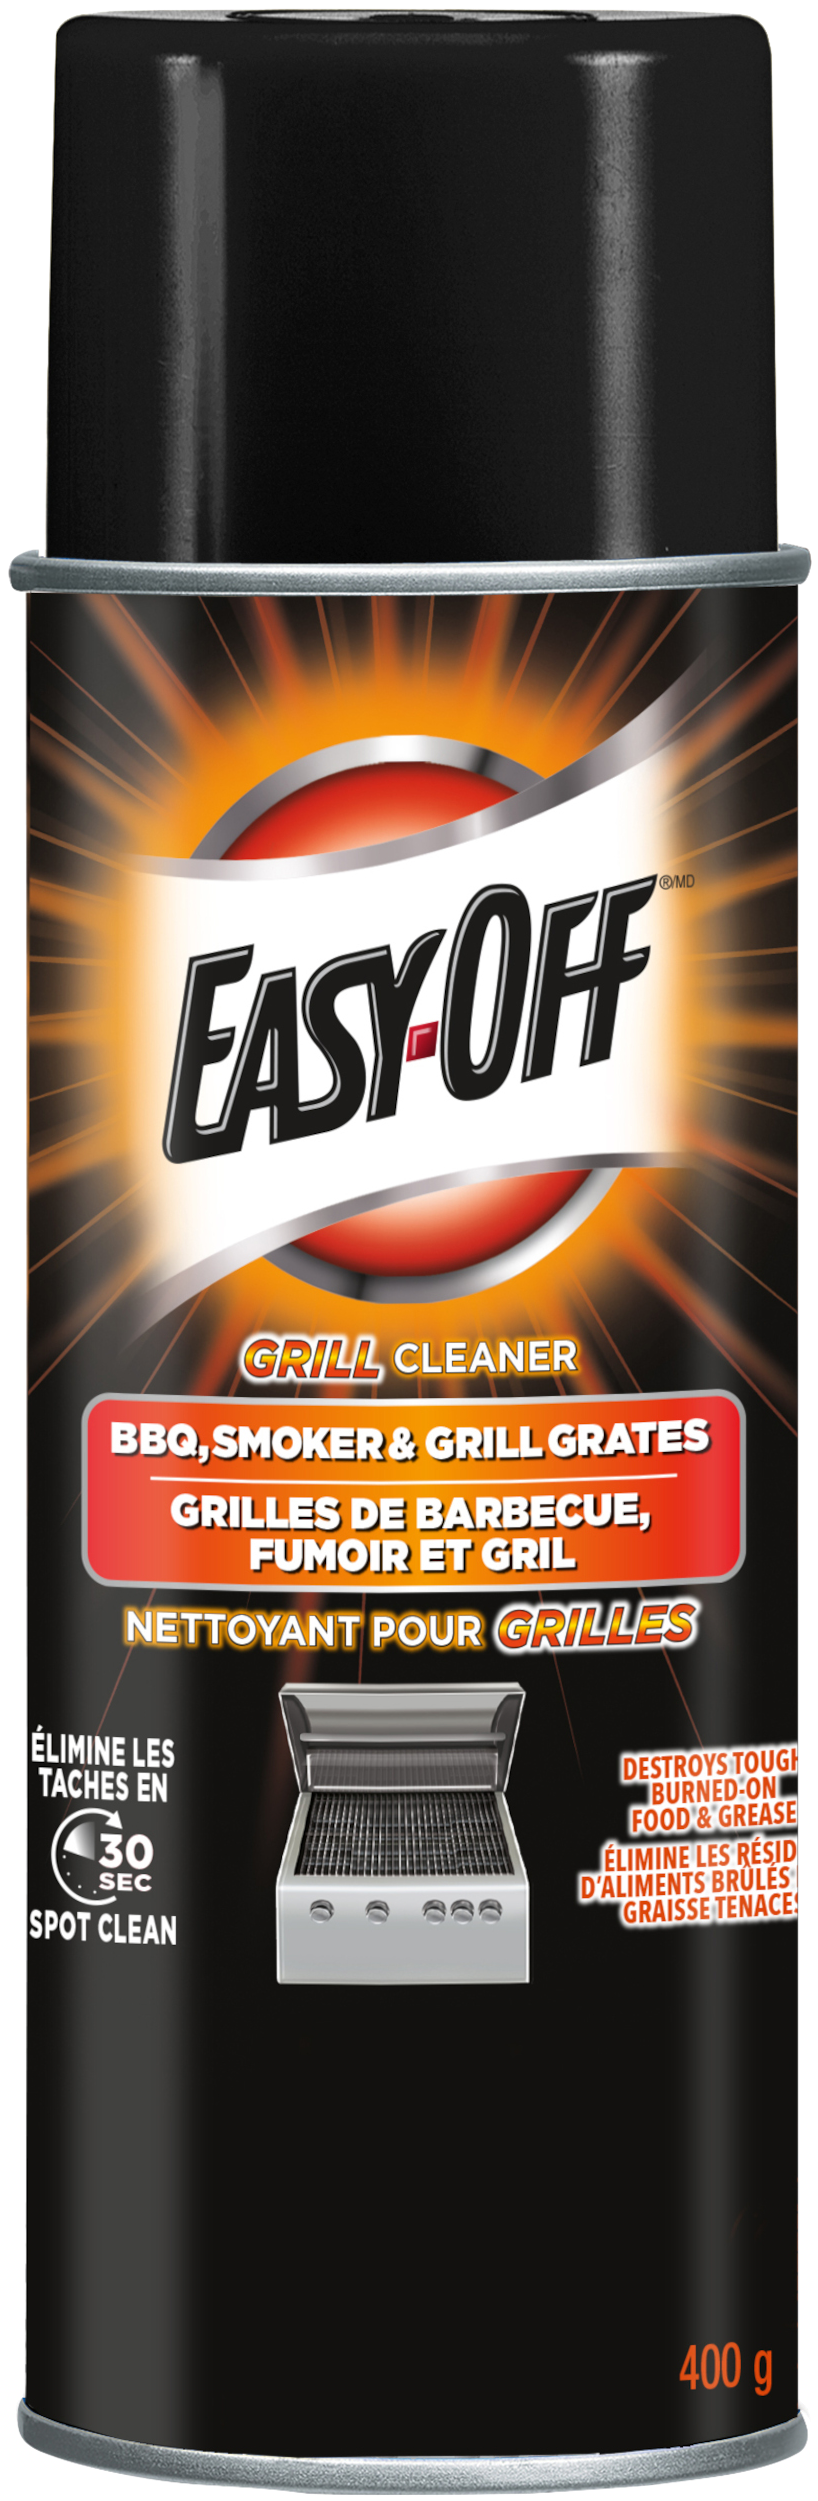 Easy-Off Grill Cleaner 400g - Quecan